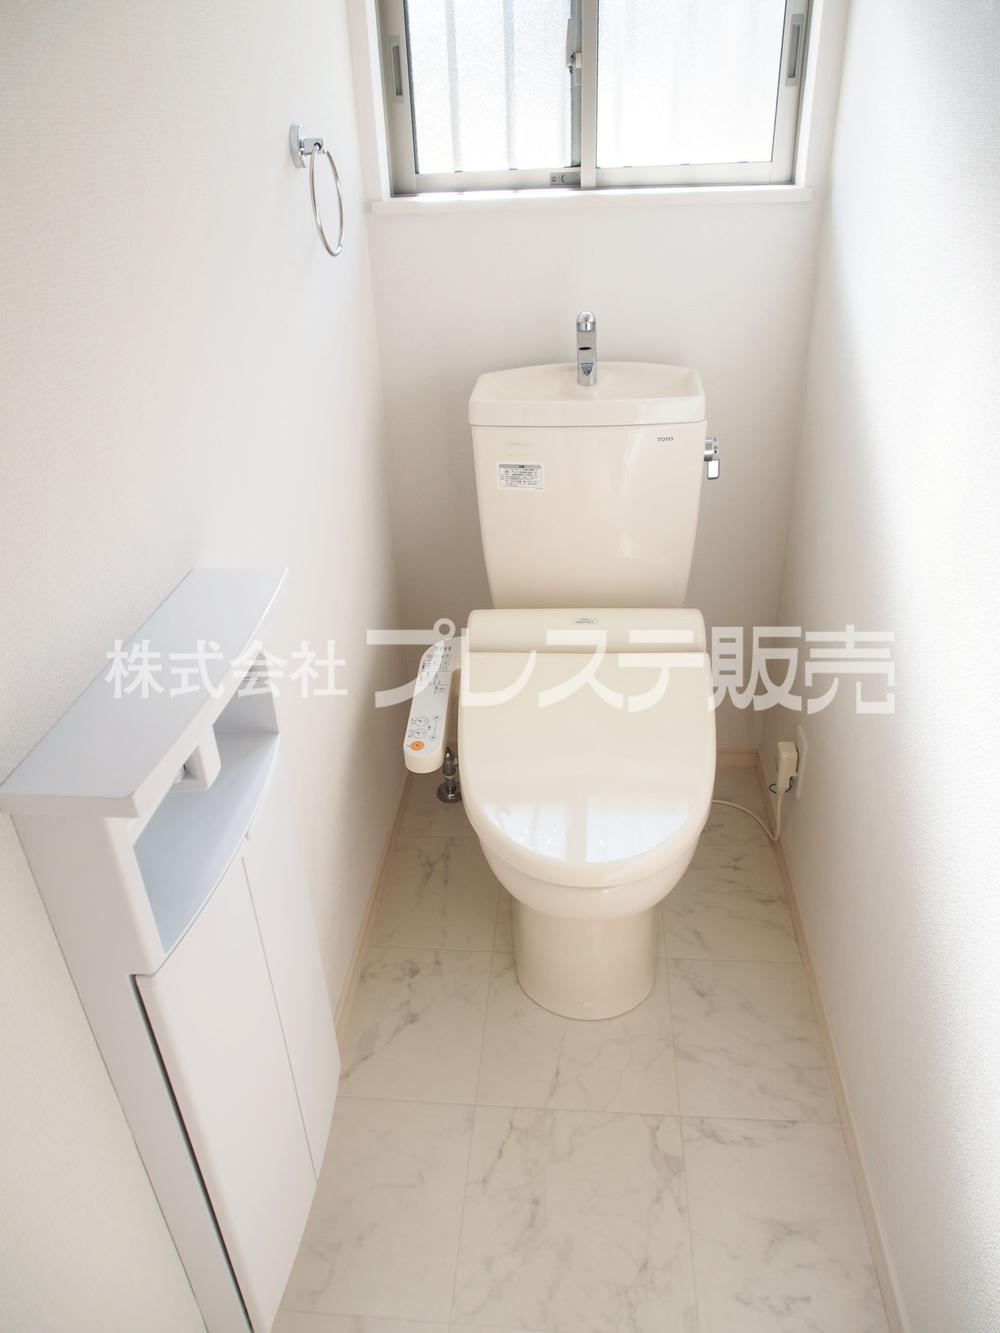 Same specifications photos (Other introspection). Standard equipped with a bidet! 